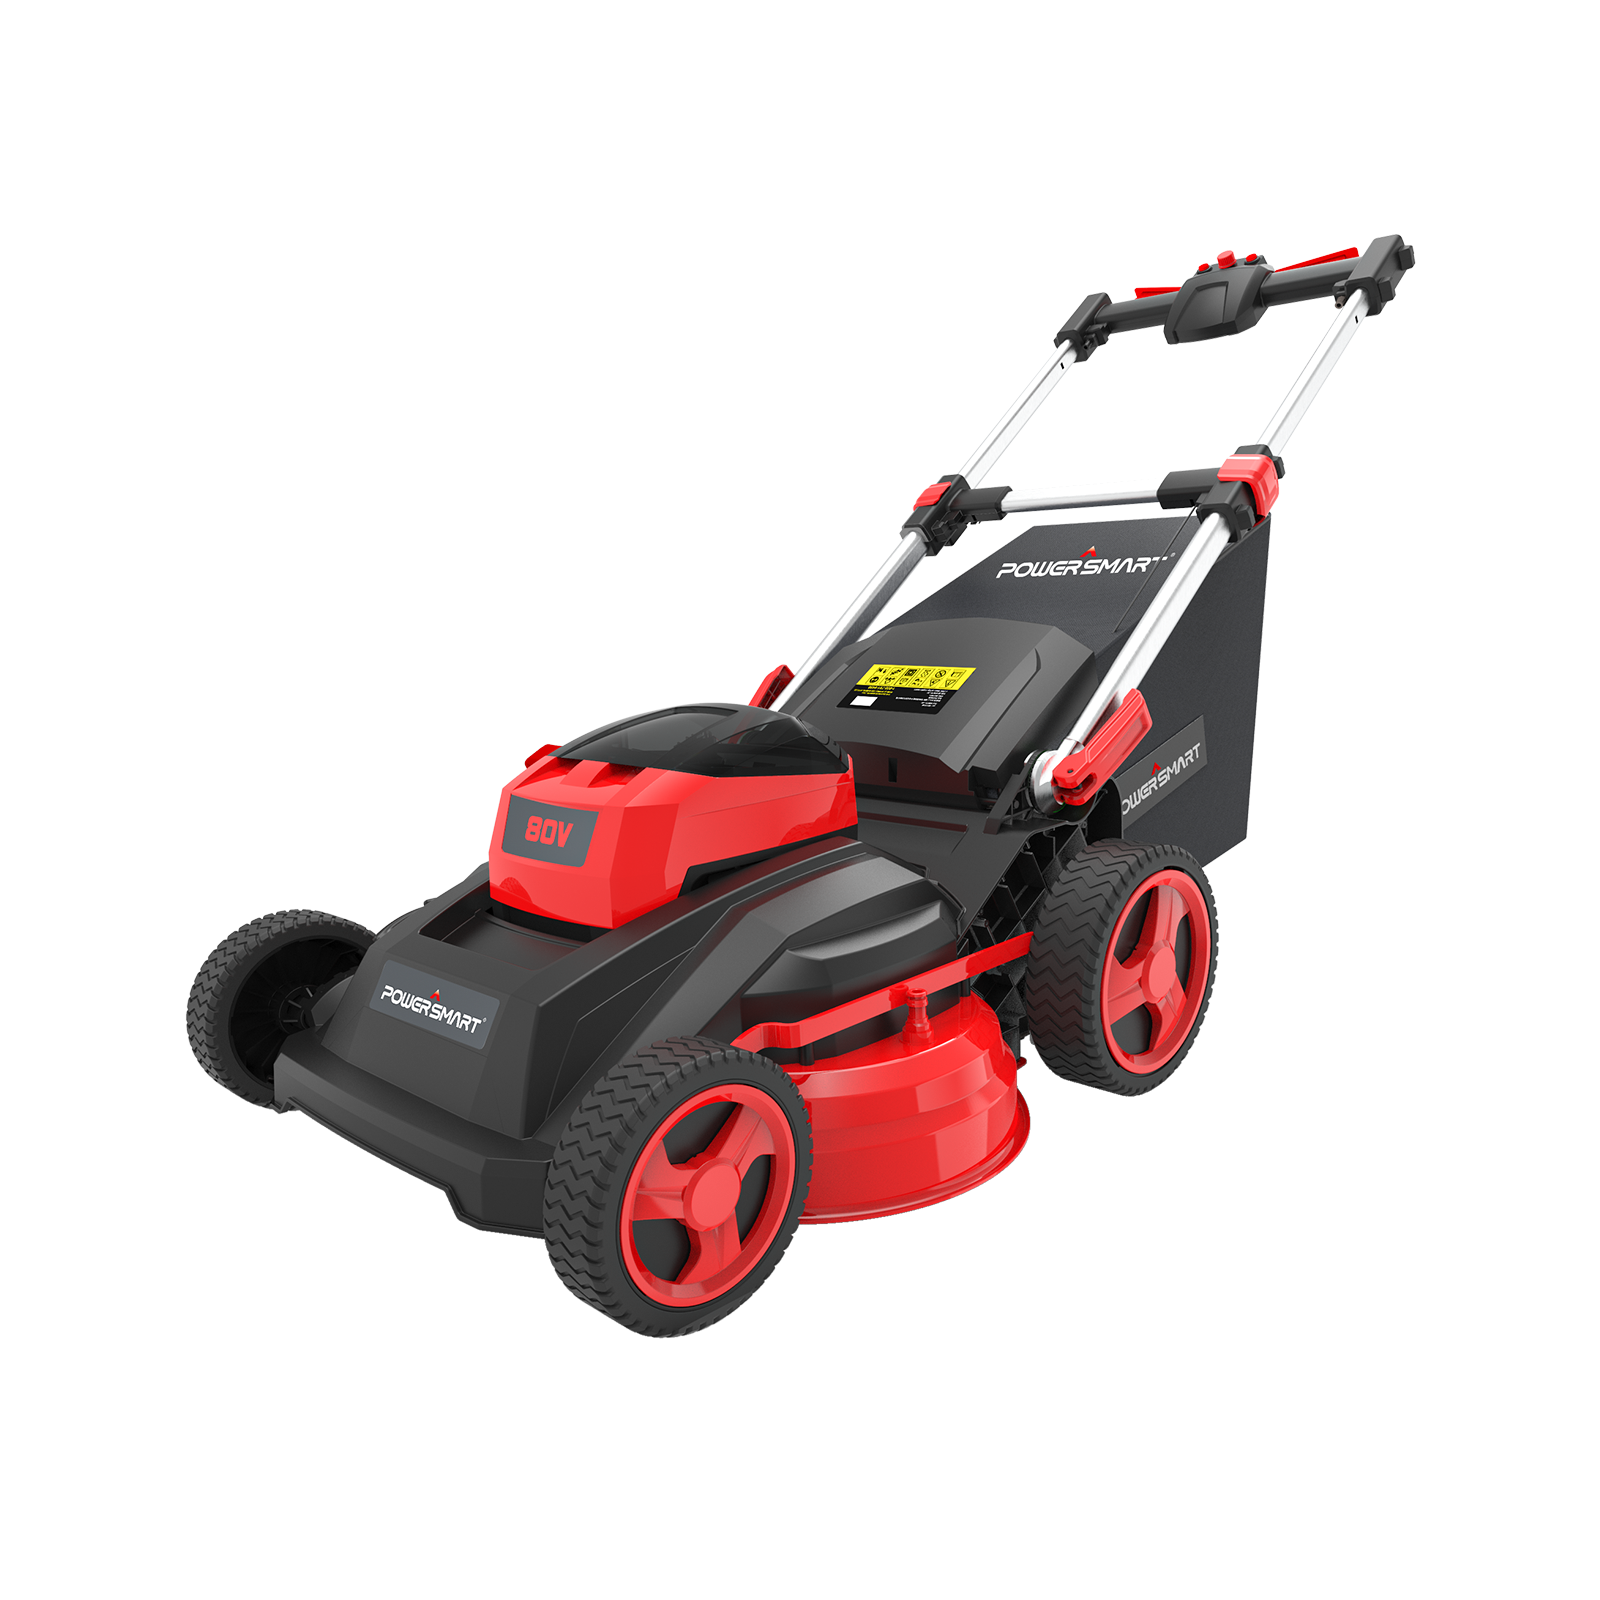 DC- 26” Cordless 80V Double Blade Lawn Mower 